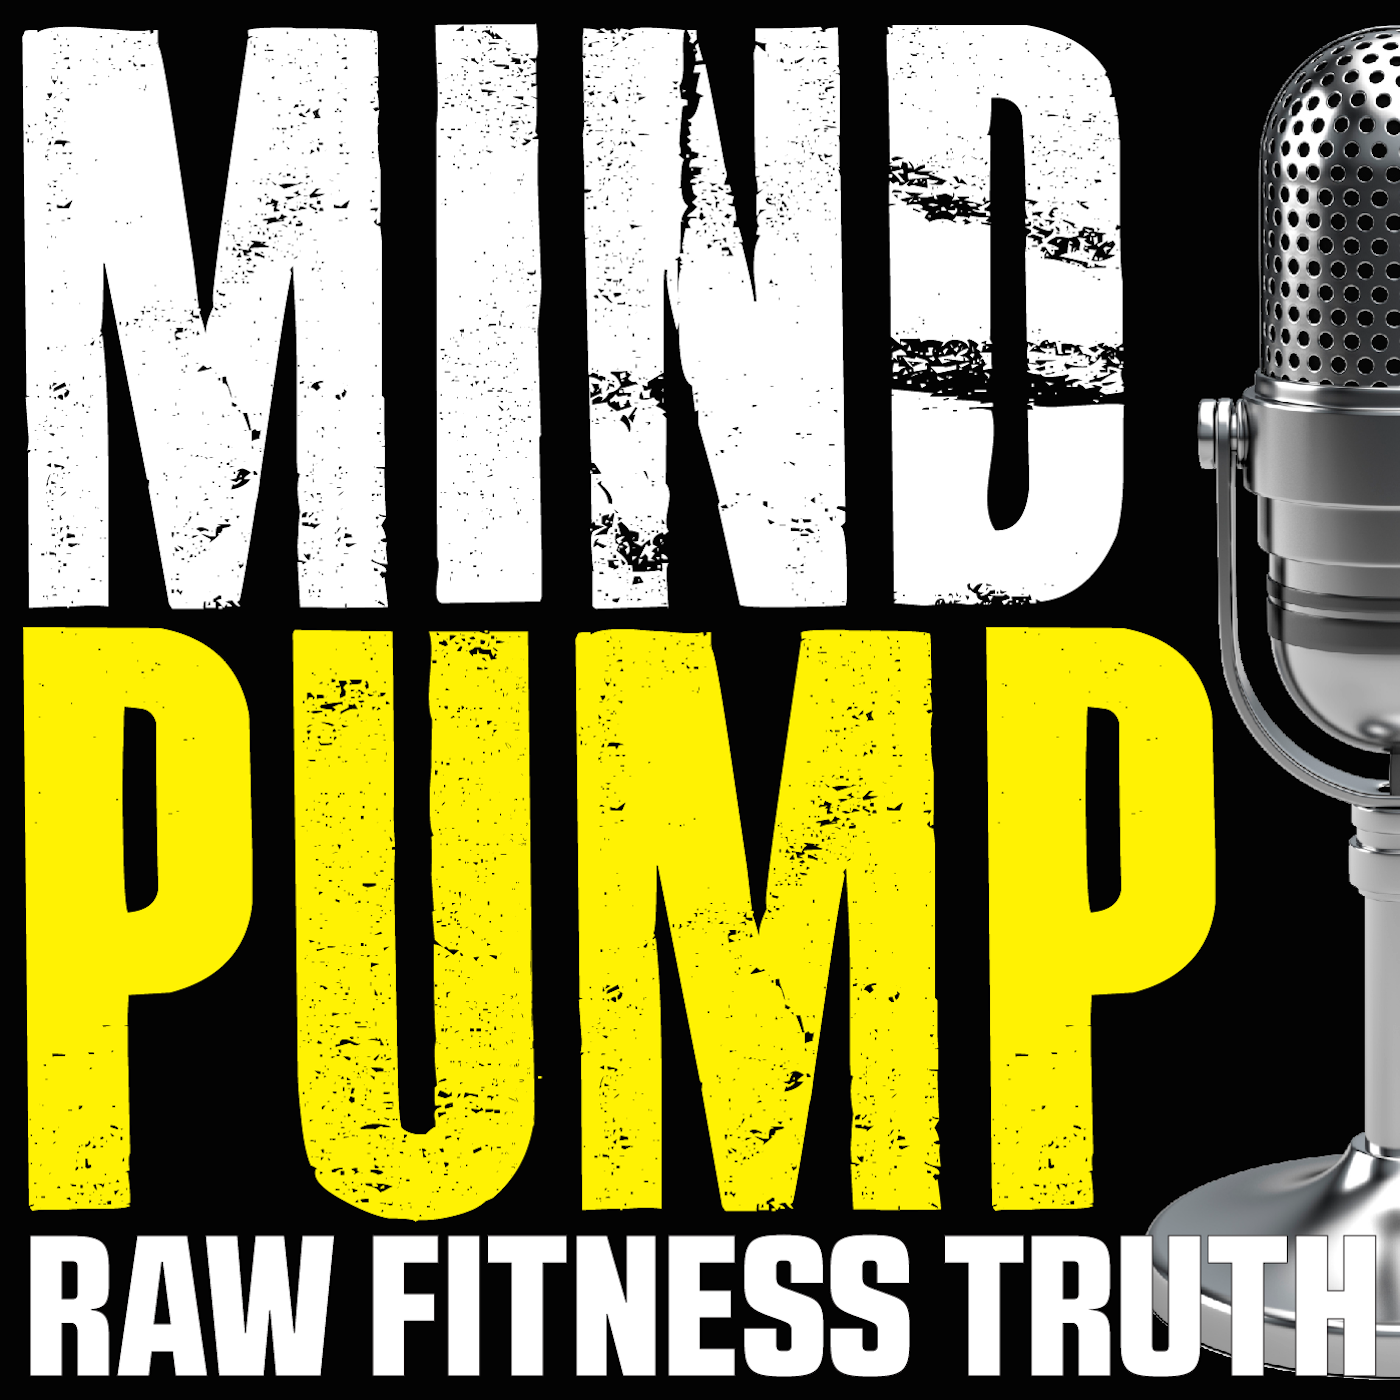 481: Adding Barbell Snatches to Workout, Disengaging Lats During Military Press & Explaining Fasting & Food Tracking to Children